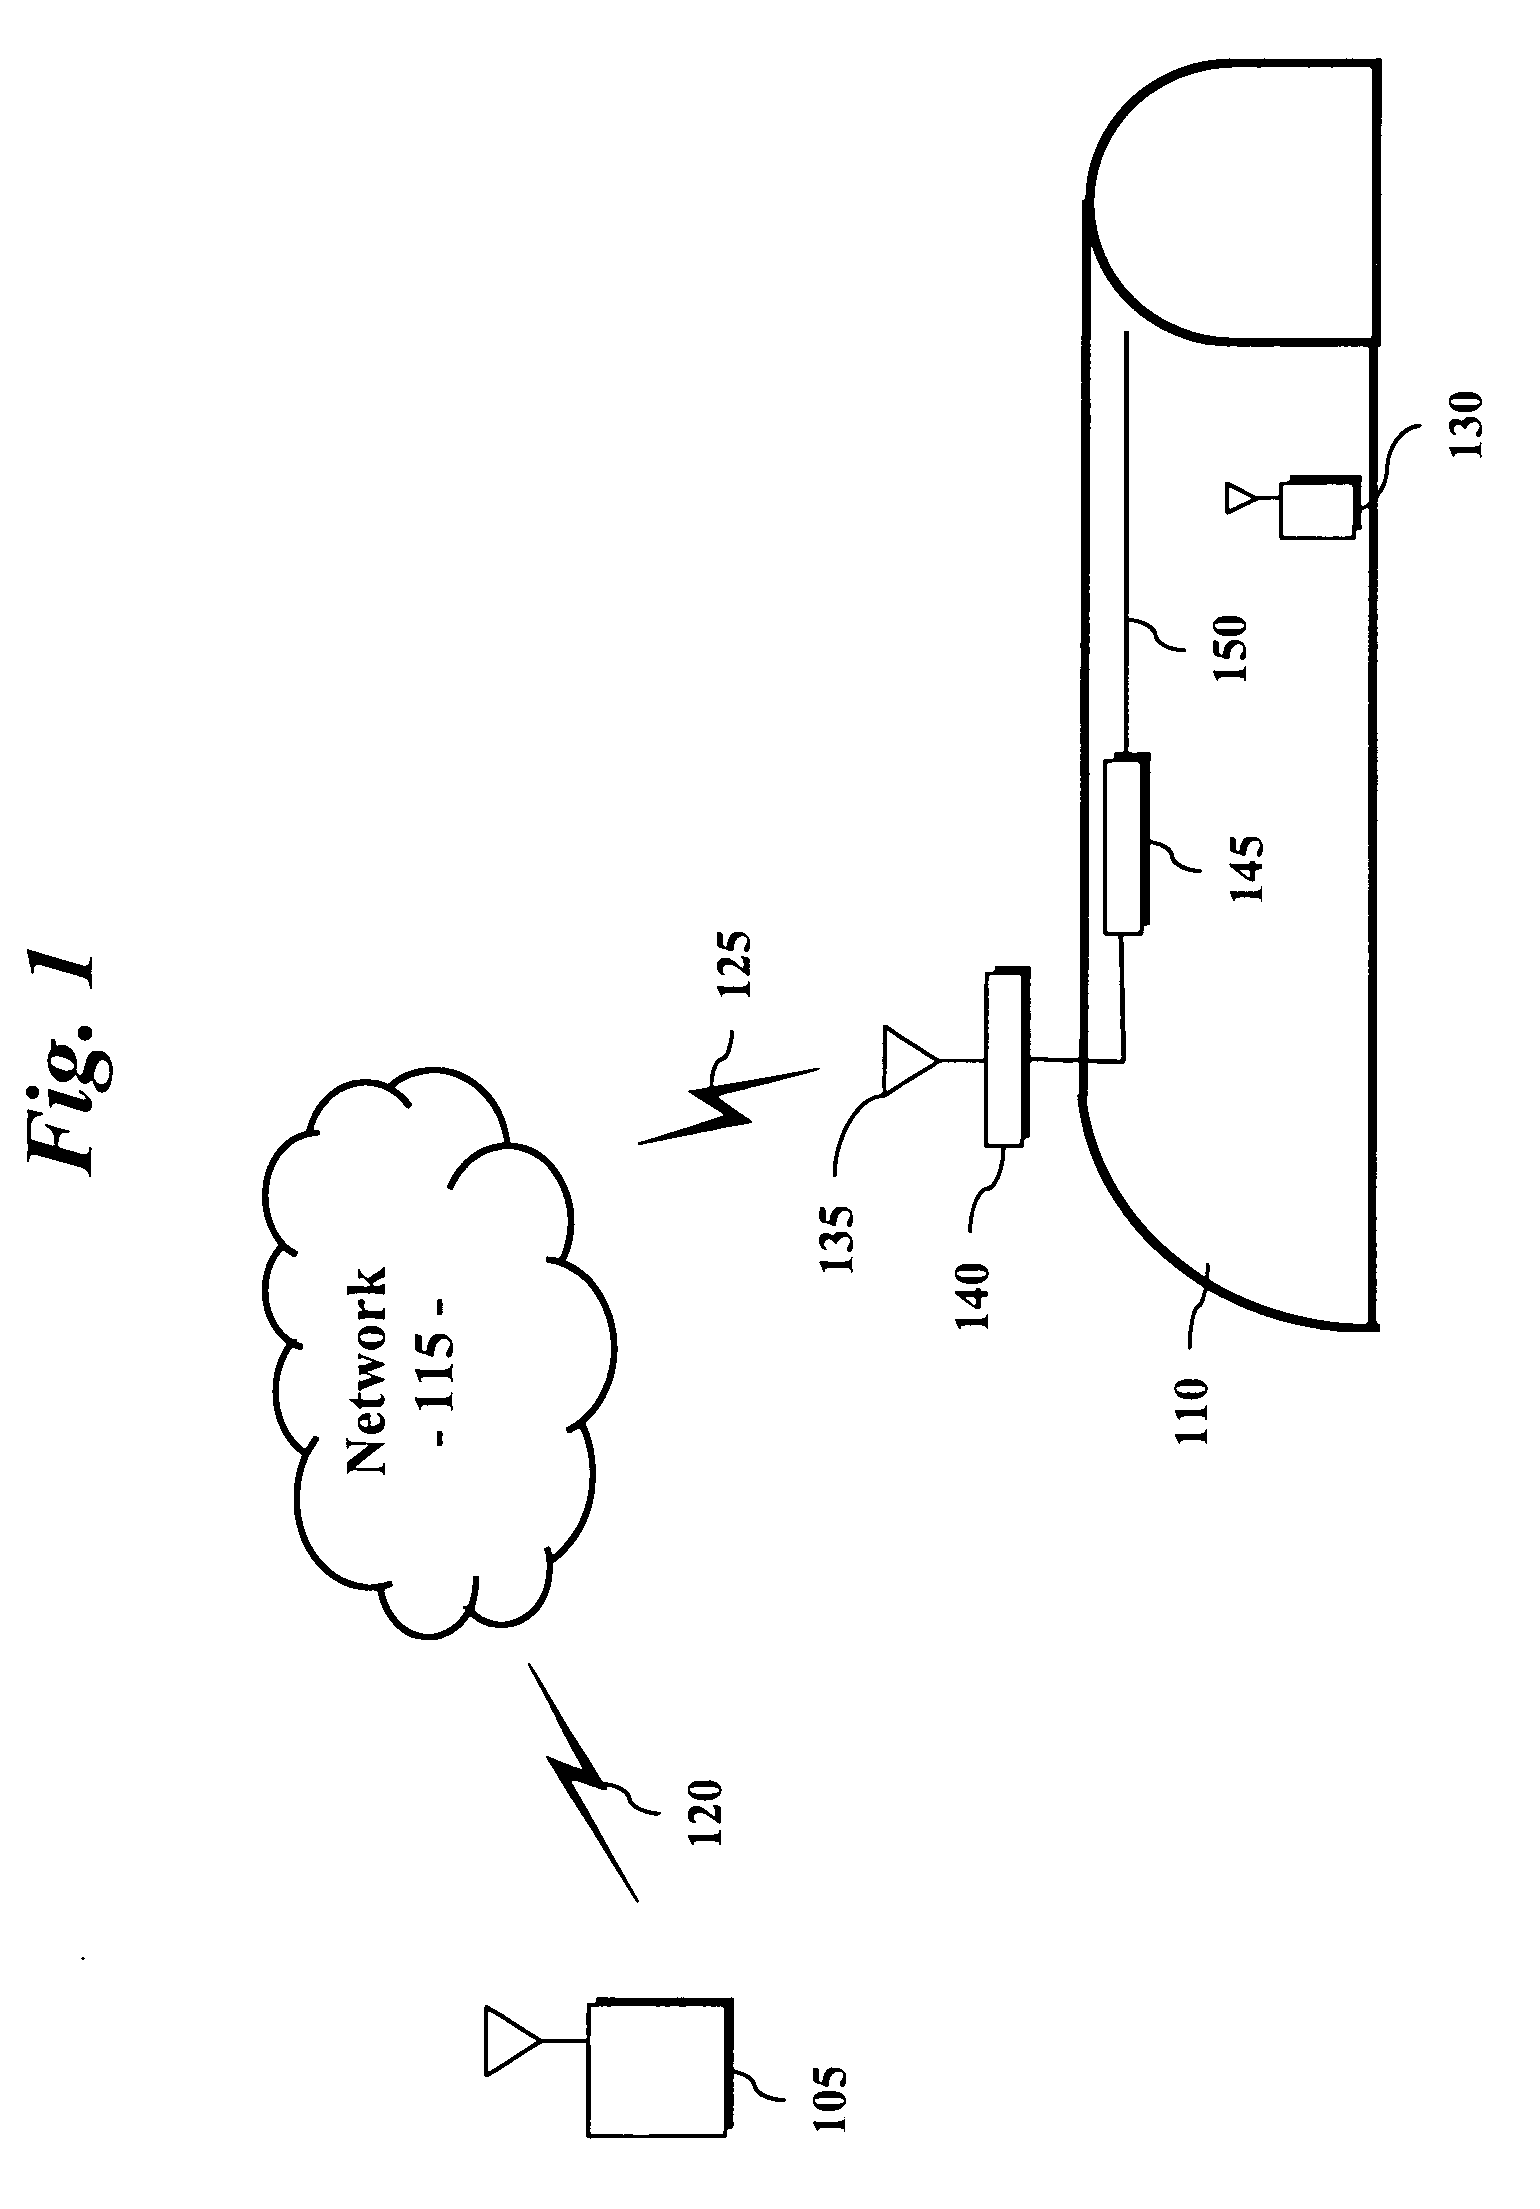 Method and apparatus for optimizing signal processing